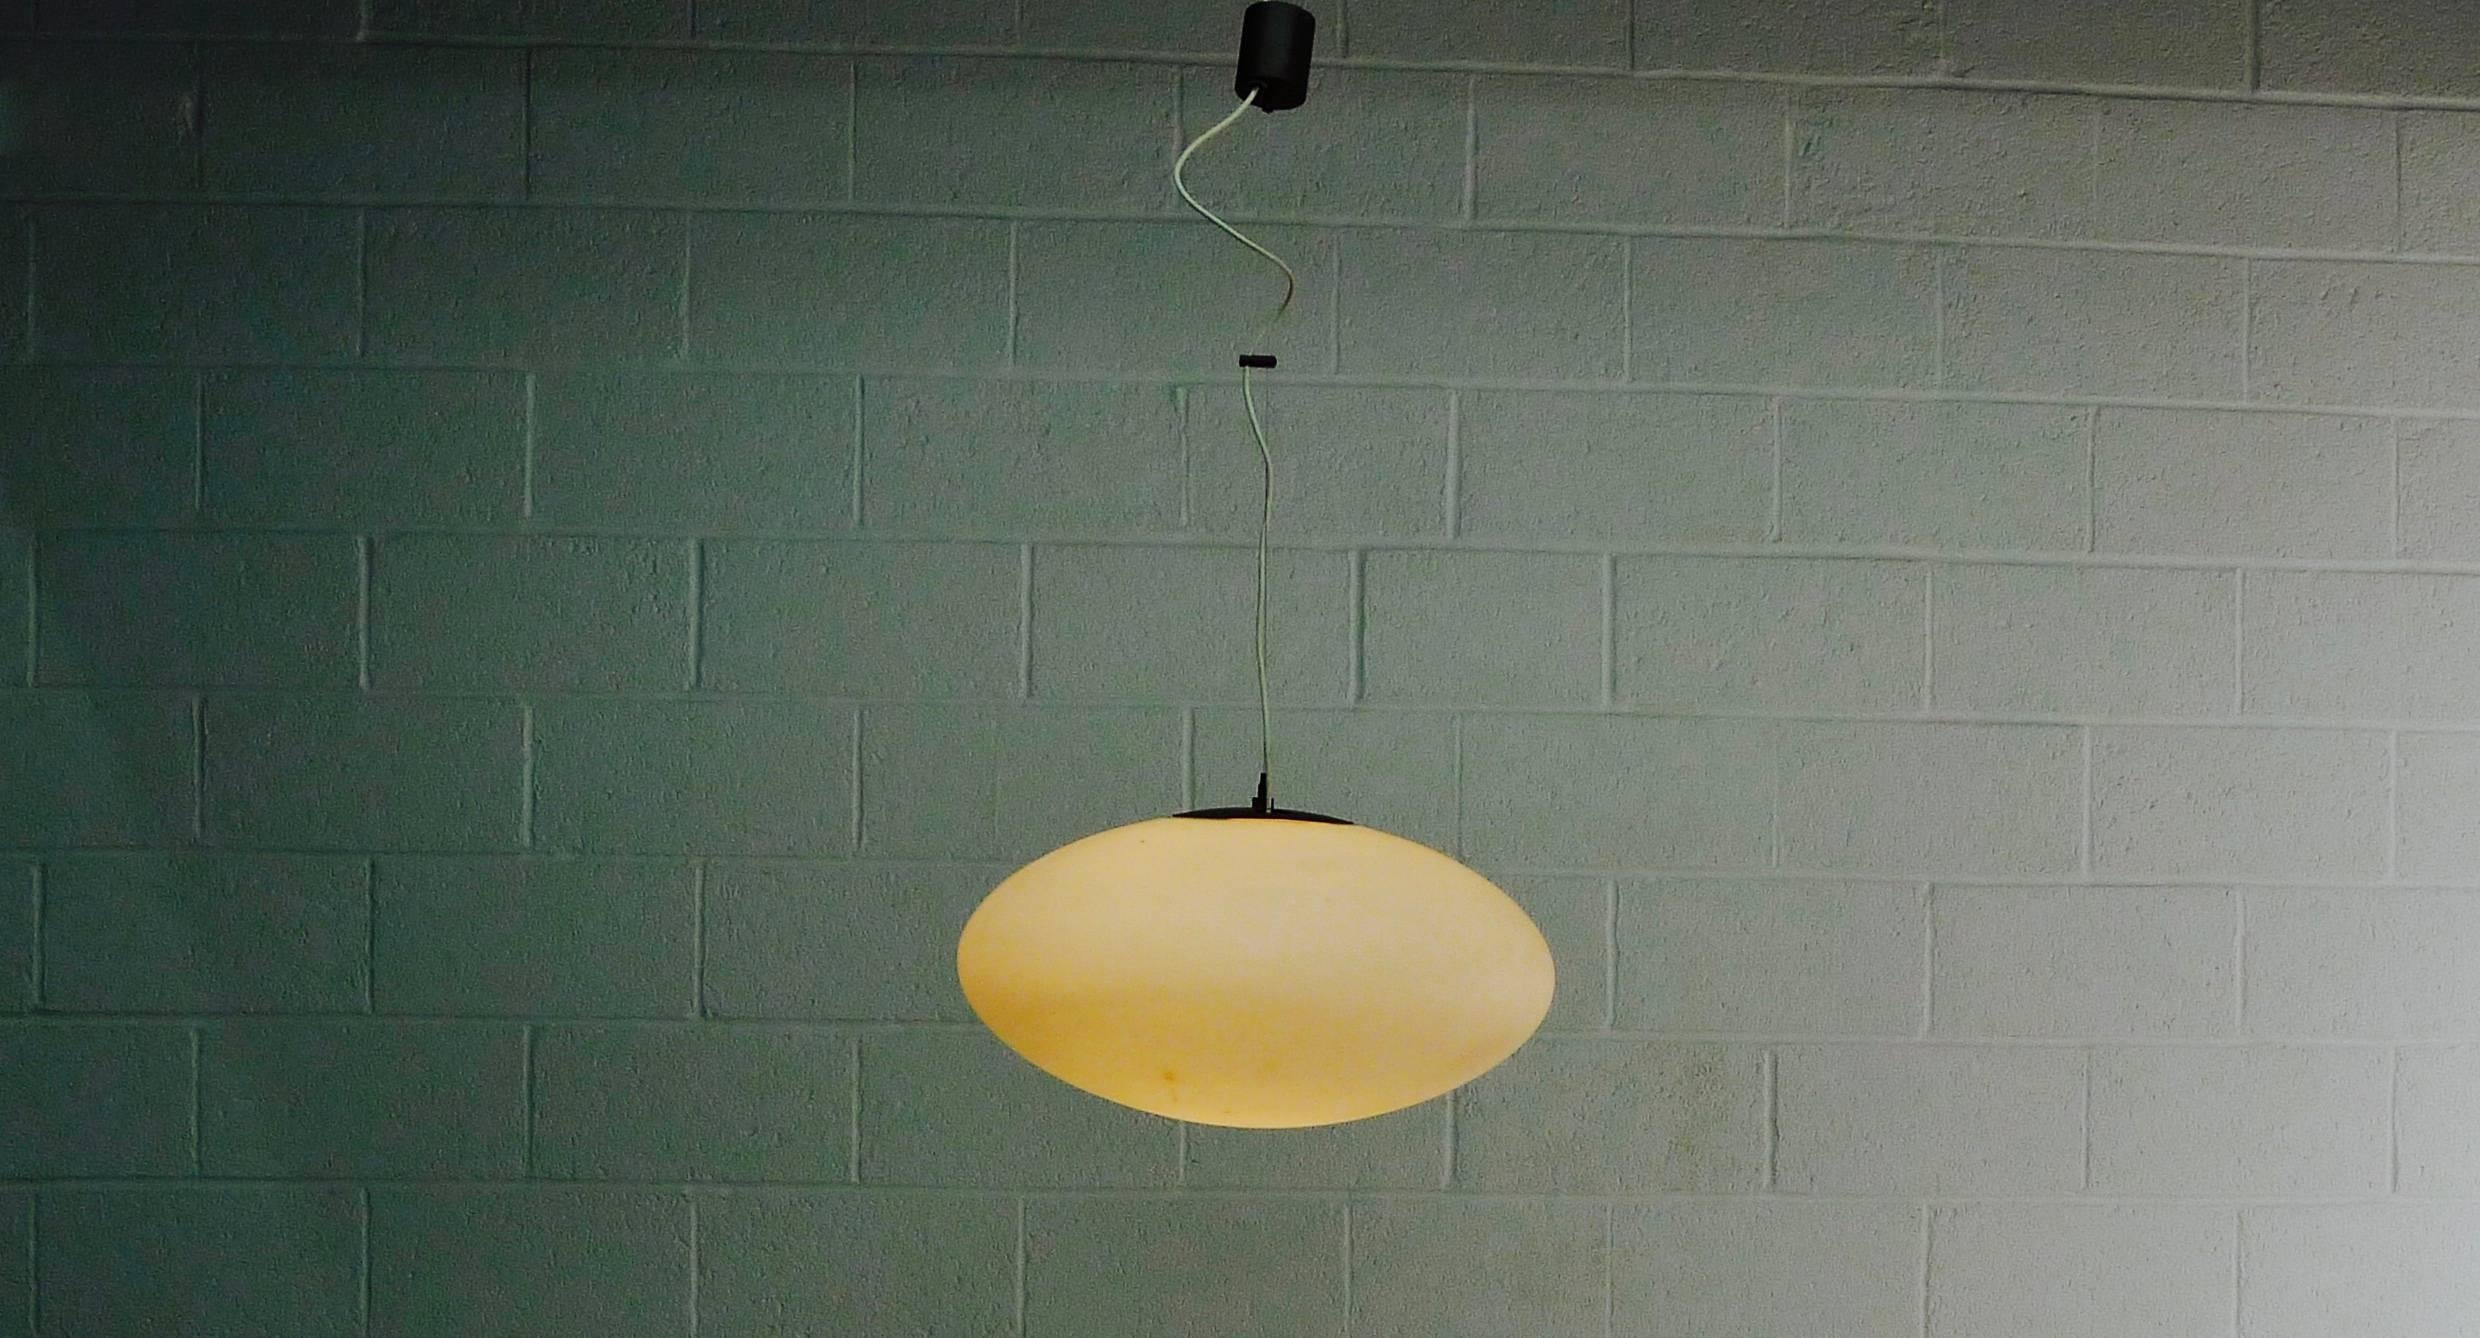 Stilnovo, Italy, 1960s. Opaque glass pendant light with mechanism allowing it to be hung off horizontal as shown in image 4. 
Interior retains original yellow label.